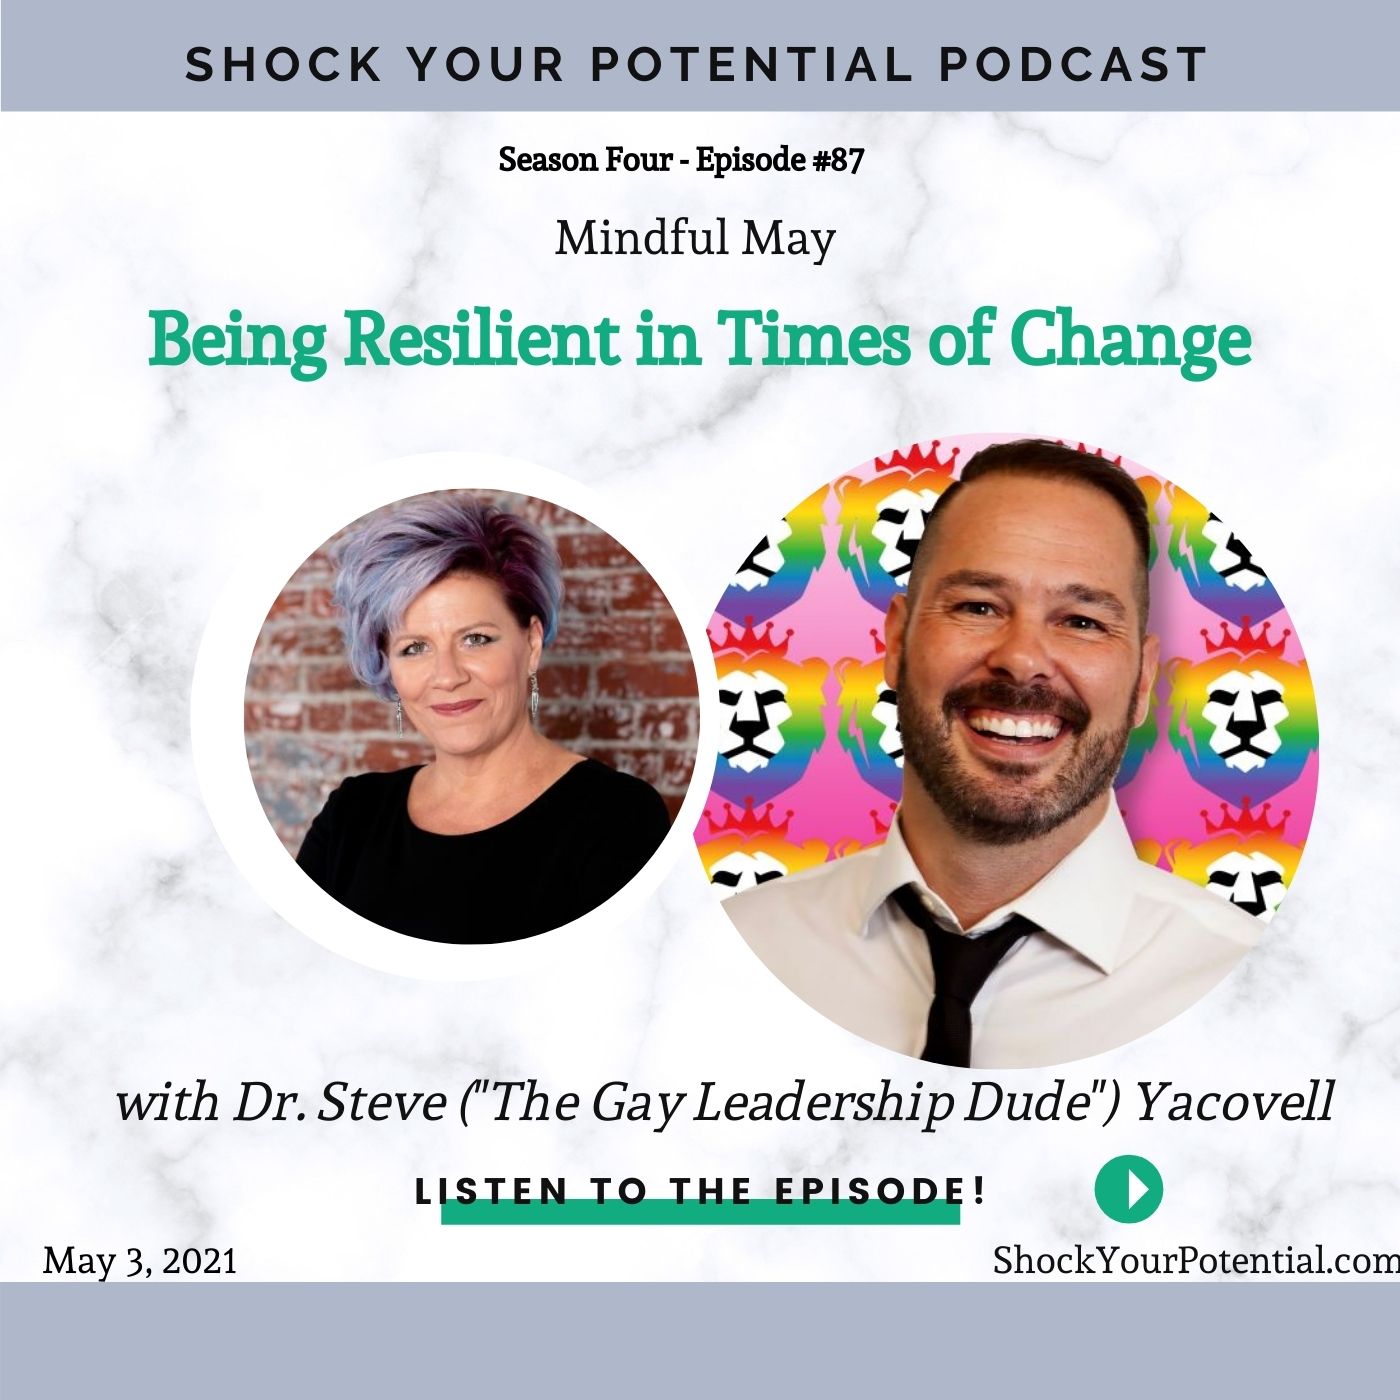 Being Resilient in Times of Change – Dr. Steve (“The Gay Leadership Dude”) Yacovelli